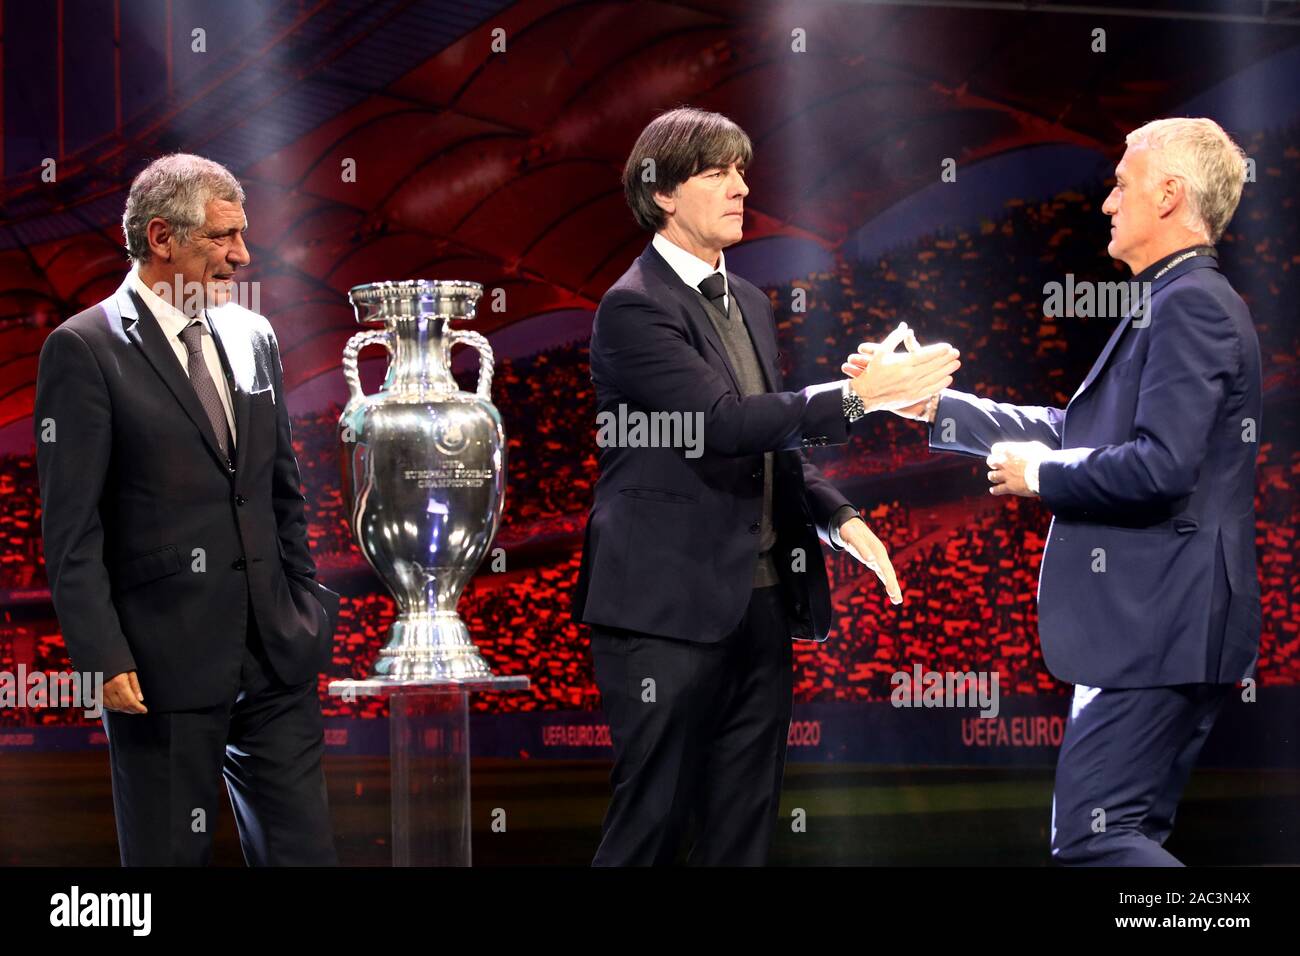 Bukarest, Romania. 30th Nov, 2019. Football, group draw for the European Football Championship 2020 at the Romexpo Exhibition Centre. The coaches of the drawn teams of Group F (Group F) are next to the European Cup: Fernando Santos (l), national coach of Portugal, Didier Deschamps (r), national coach of France, and Joachim Löw (M), national coach of Germany. UEFA EURO 2020 will take place in twelve countries from 12 June to 12 July 2020. Credit: Christian Charisius/dpa/Alamy Live News Stock Photo